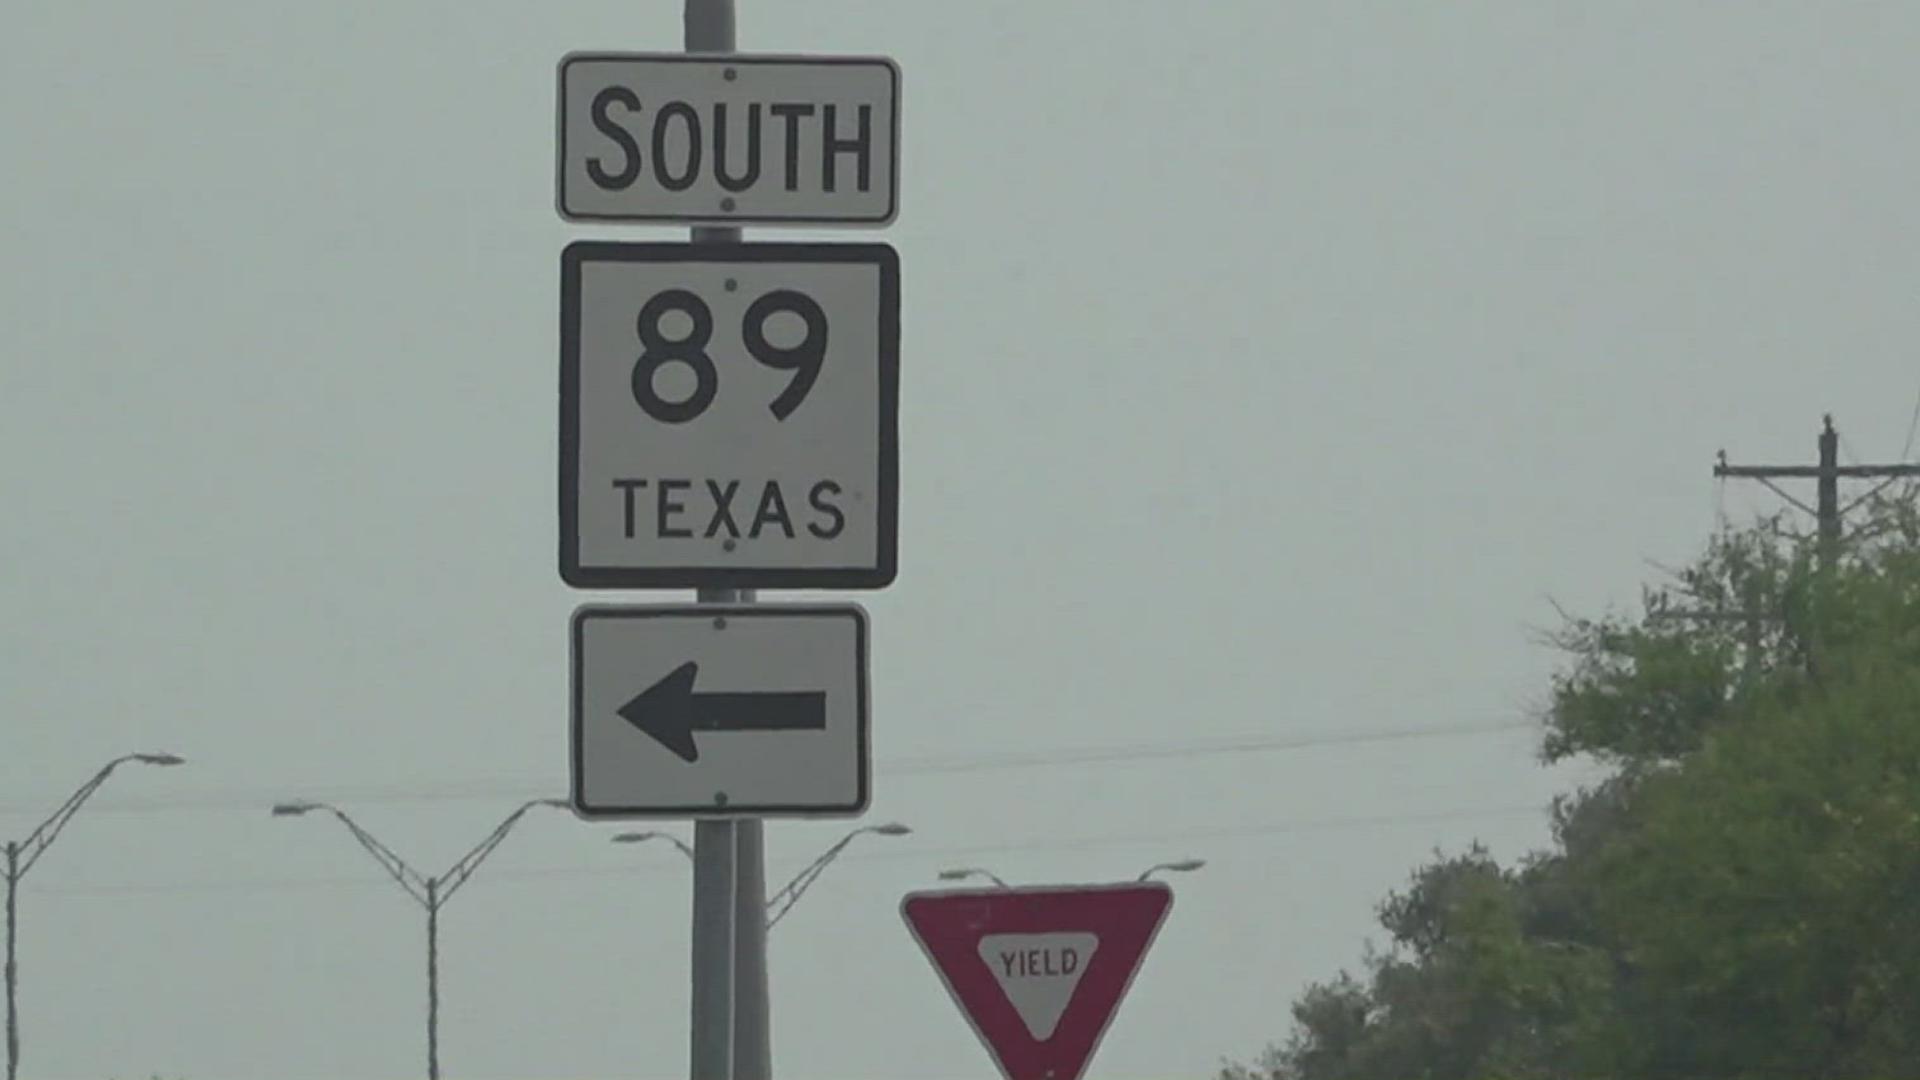 DPS Sergeant Rob Mallory told 3NEWS there have been 51 crashes at the intersection of SH 89 and US 77 in the past five years, three crashes were fatal.